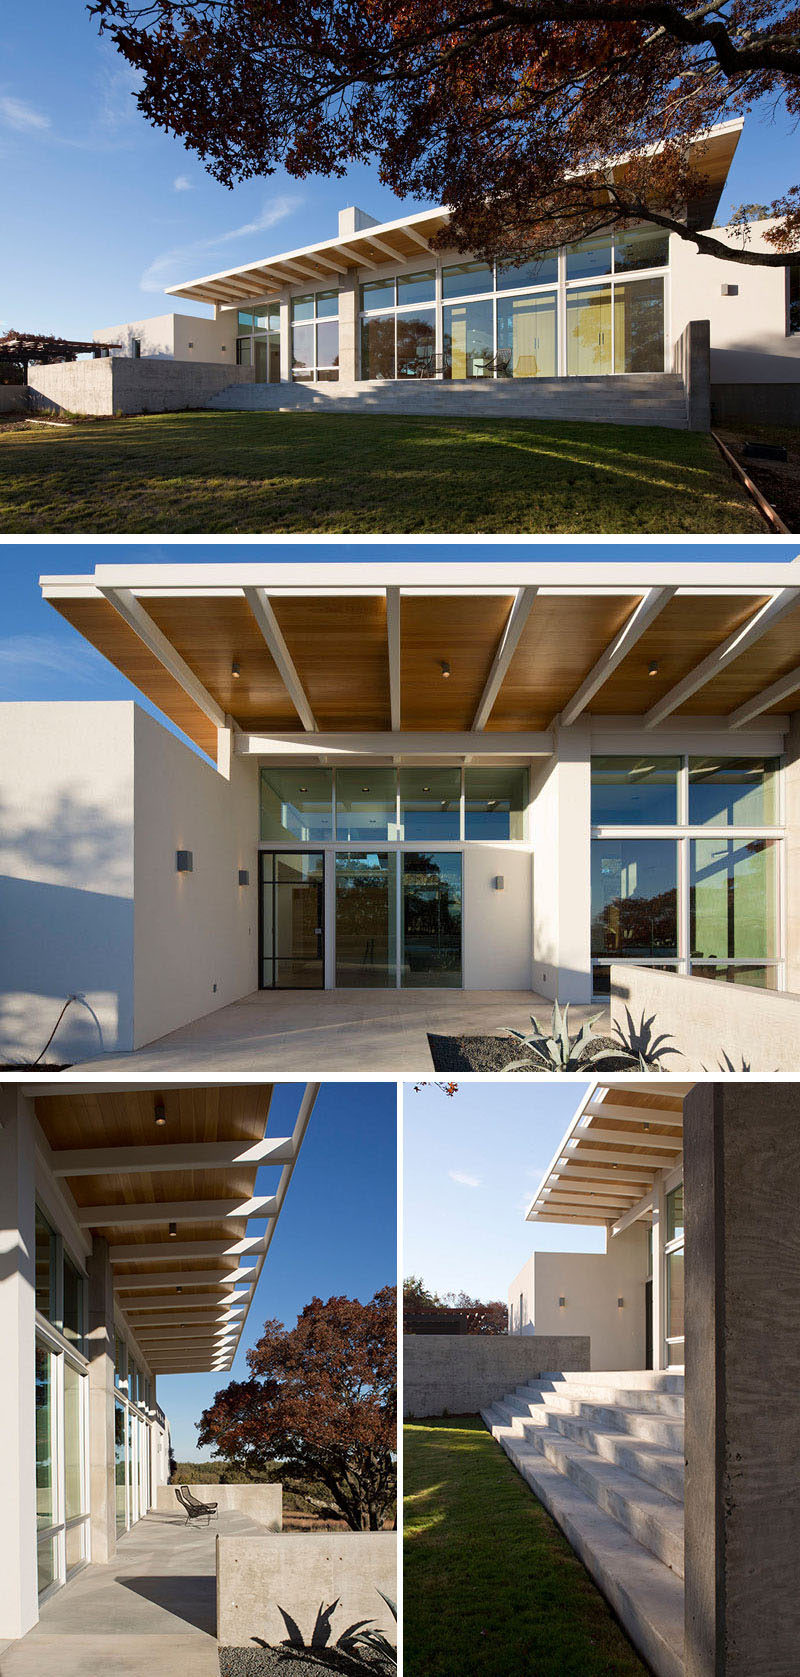 At the front of this modern house, the large overhang of the roof provides protection from the elements while also allowing plenty of natural light to pass through the massive windows along the entire front of the home. A sunny concrete patio and concrete steps allow people to make the most of a sunny day outside.